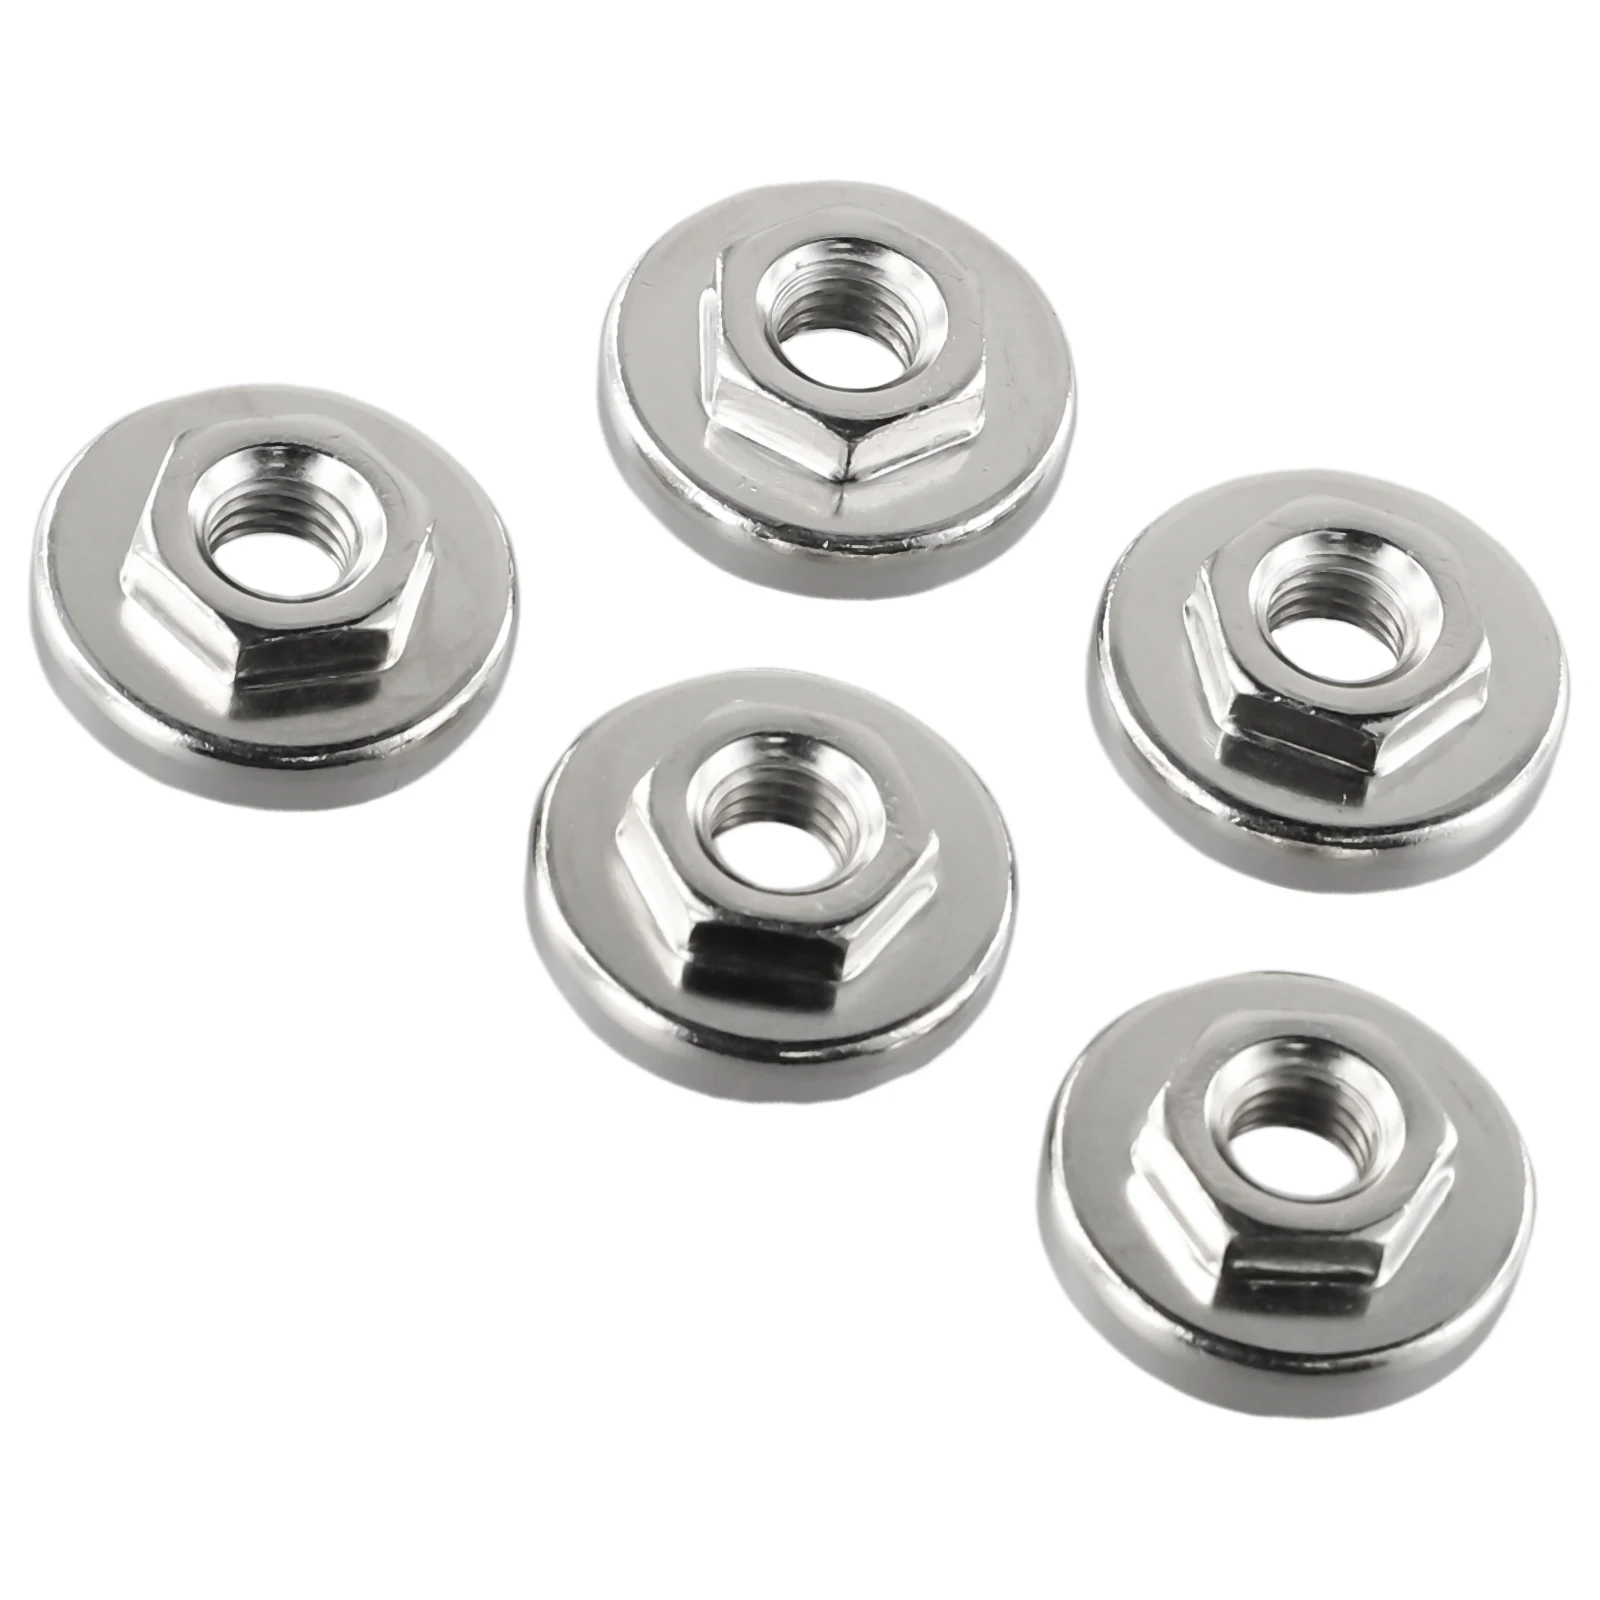 

5PCS Pressure Plate Cover M10 Thread Hexagon Locking Nut Fitting Tools Replacement For 100 Type Angle Grinder Accessories